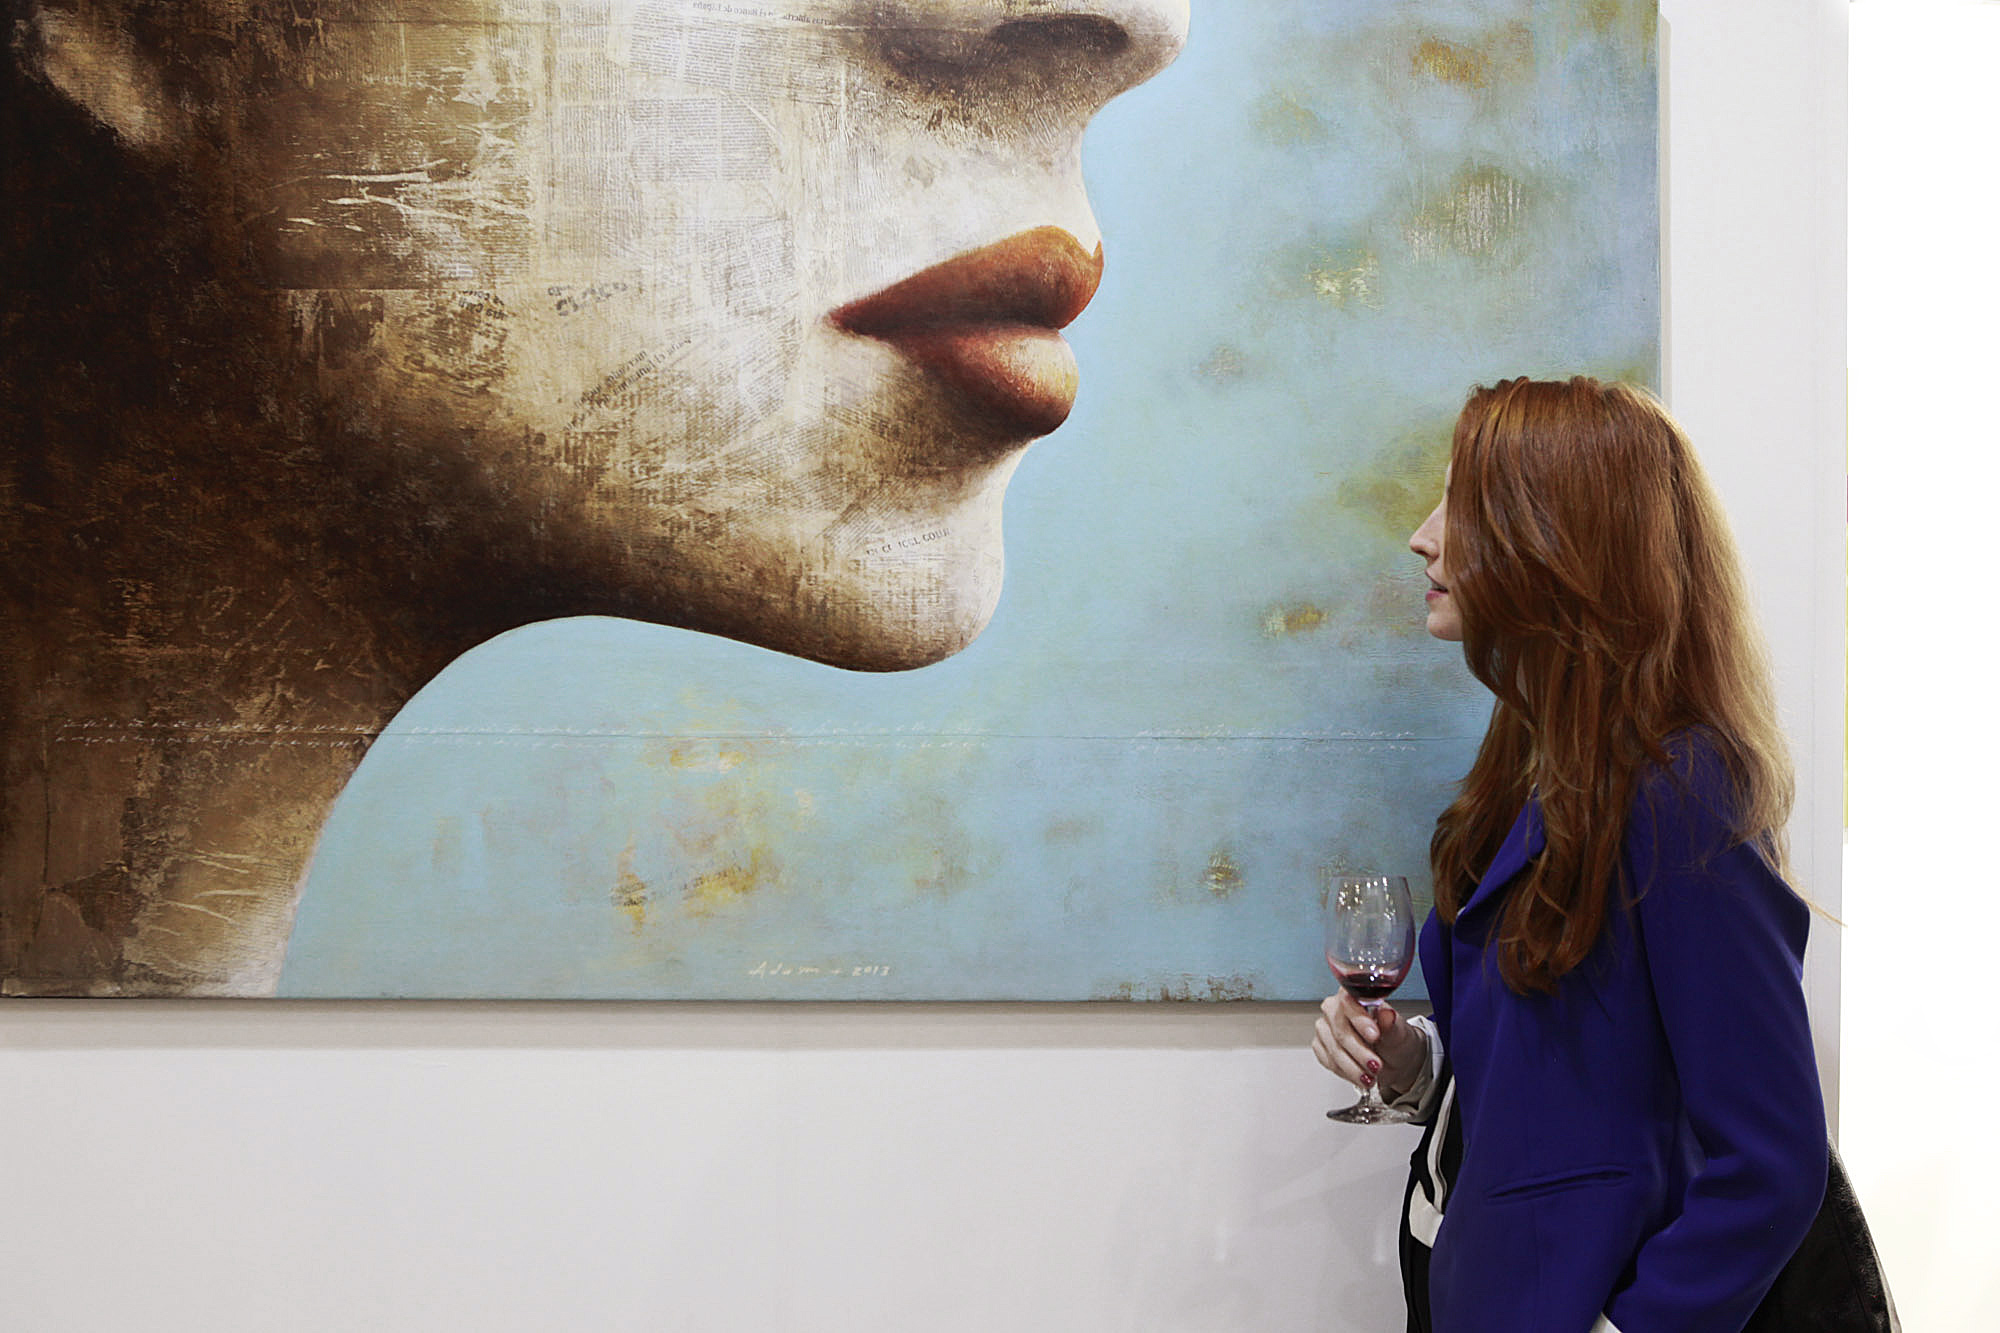 A women holding a glass of wine, stopping by an large painting hanging on wall